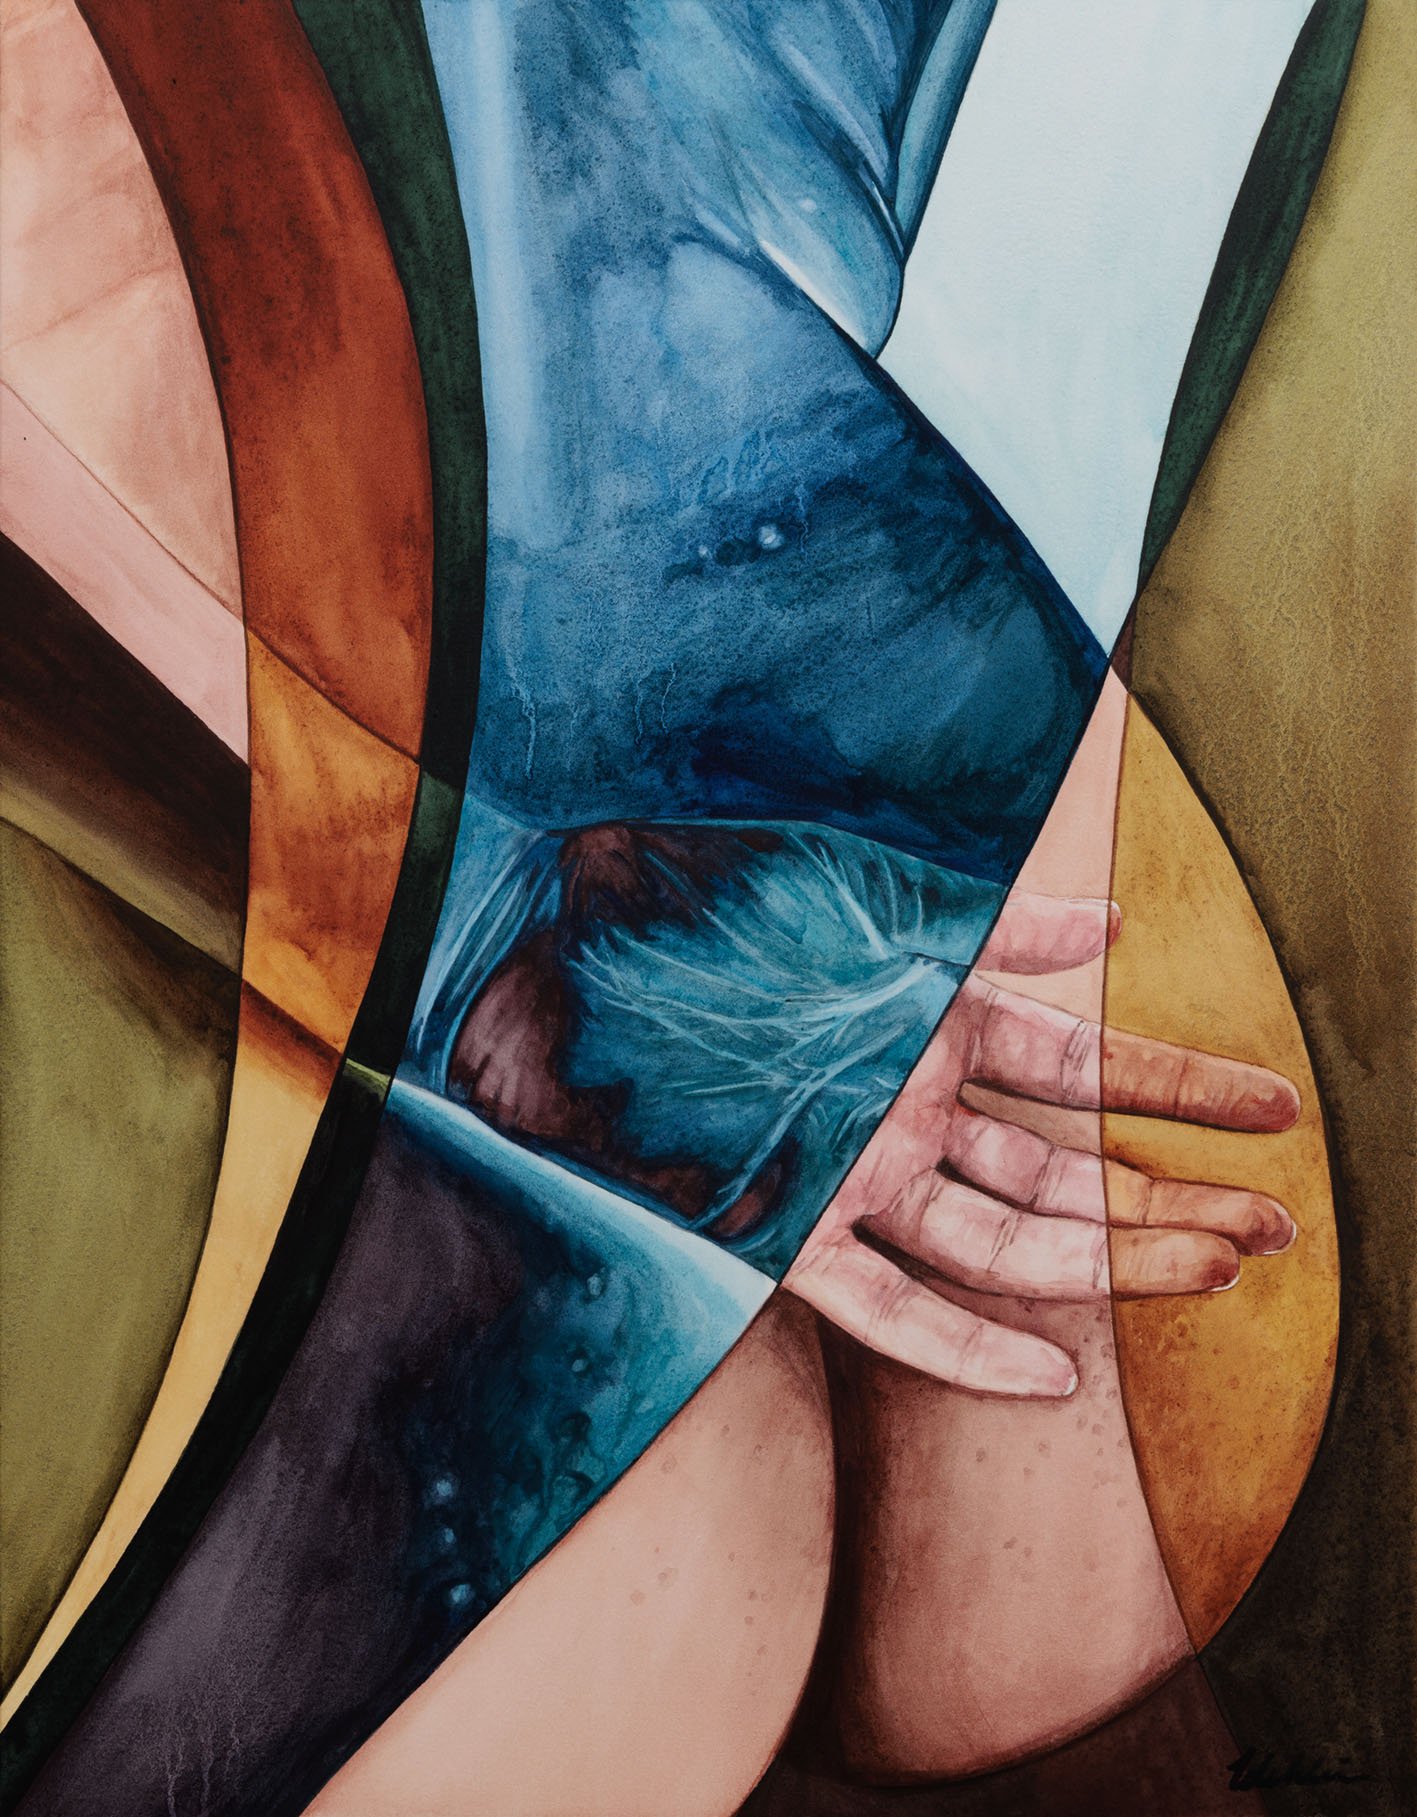   By Your Hands  2023, 35 x 45cm, Watercolour, Gouache and Acrylic on Paper  SOLD 